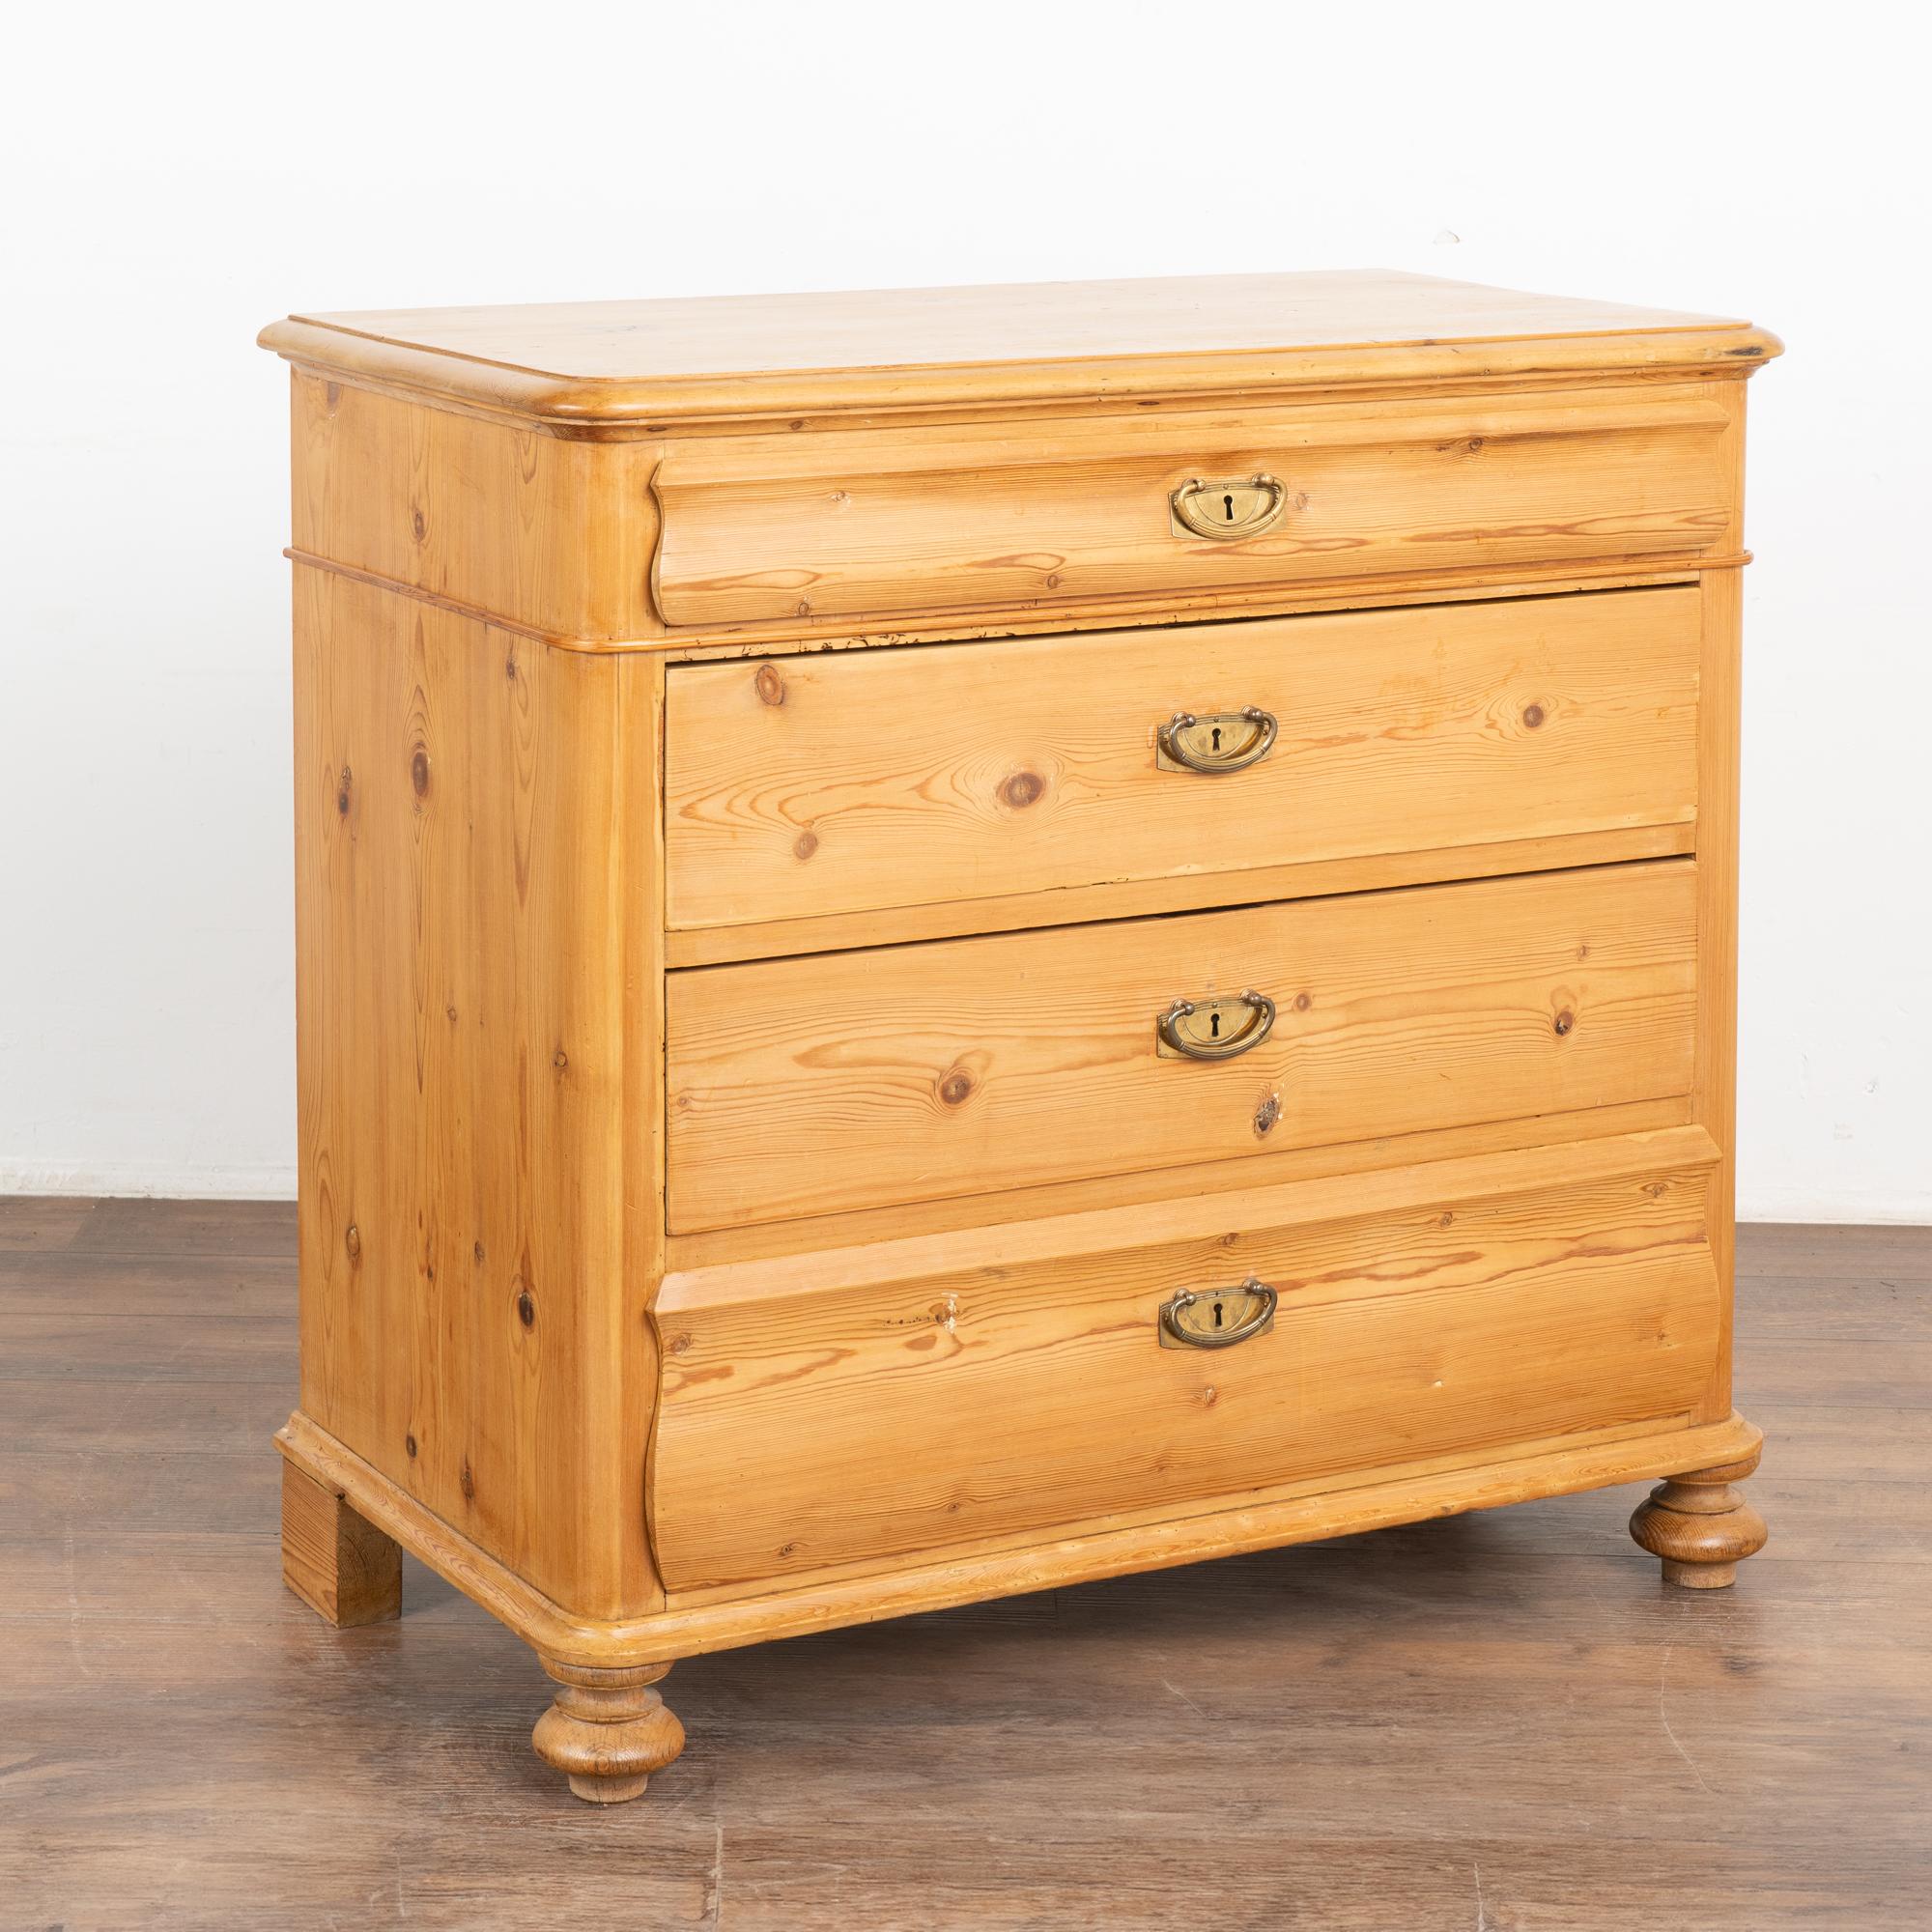 Antique pine chest of four drawers resting on bun feet.
Gentle curves to top and bottom drawers, dove-tail joints and brass pulls.
Note the natural wax finish that brings out the warmth of the pine. 
Restored, this dresser is strong, stable and